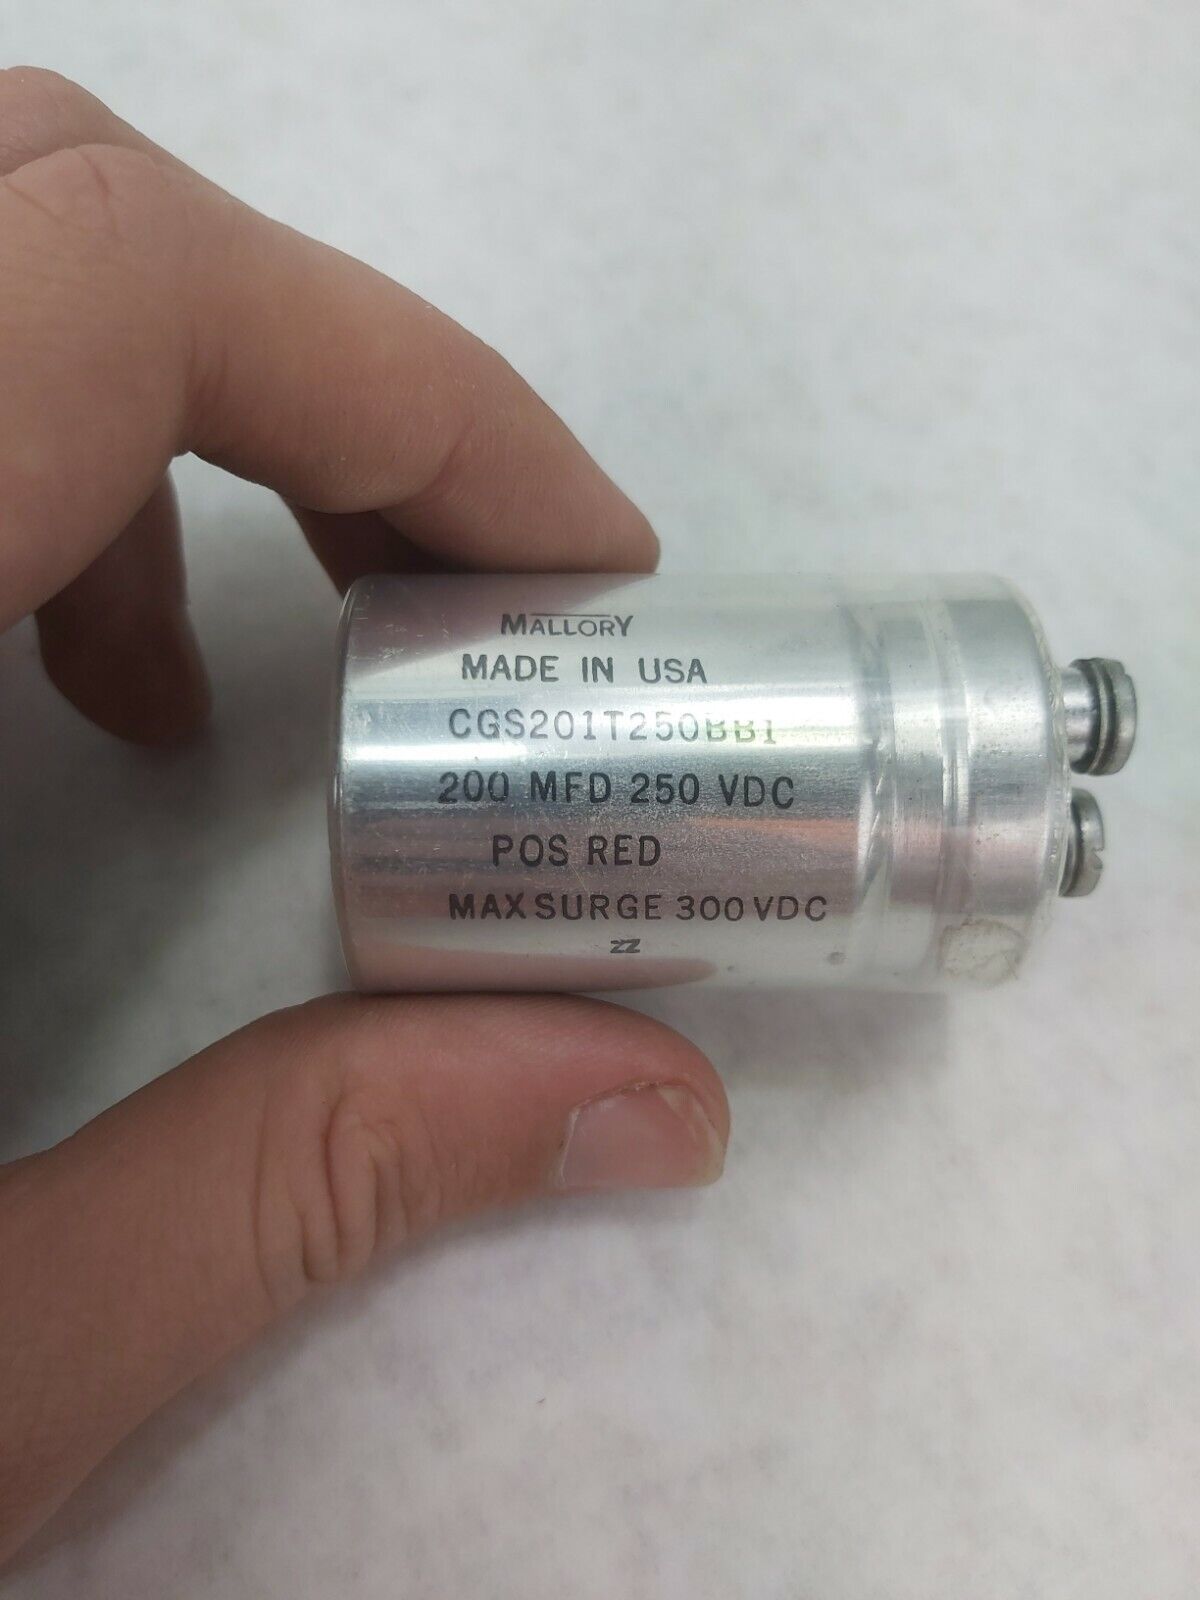 Mallory CGS201T250BB1 200MFD 250VDC POS RED 300VDC MAX Capacitor